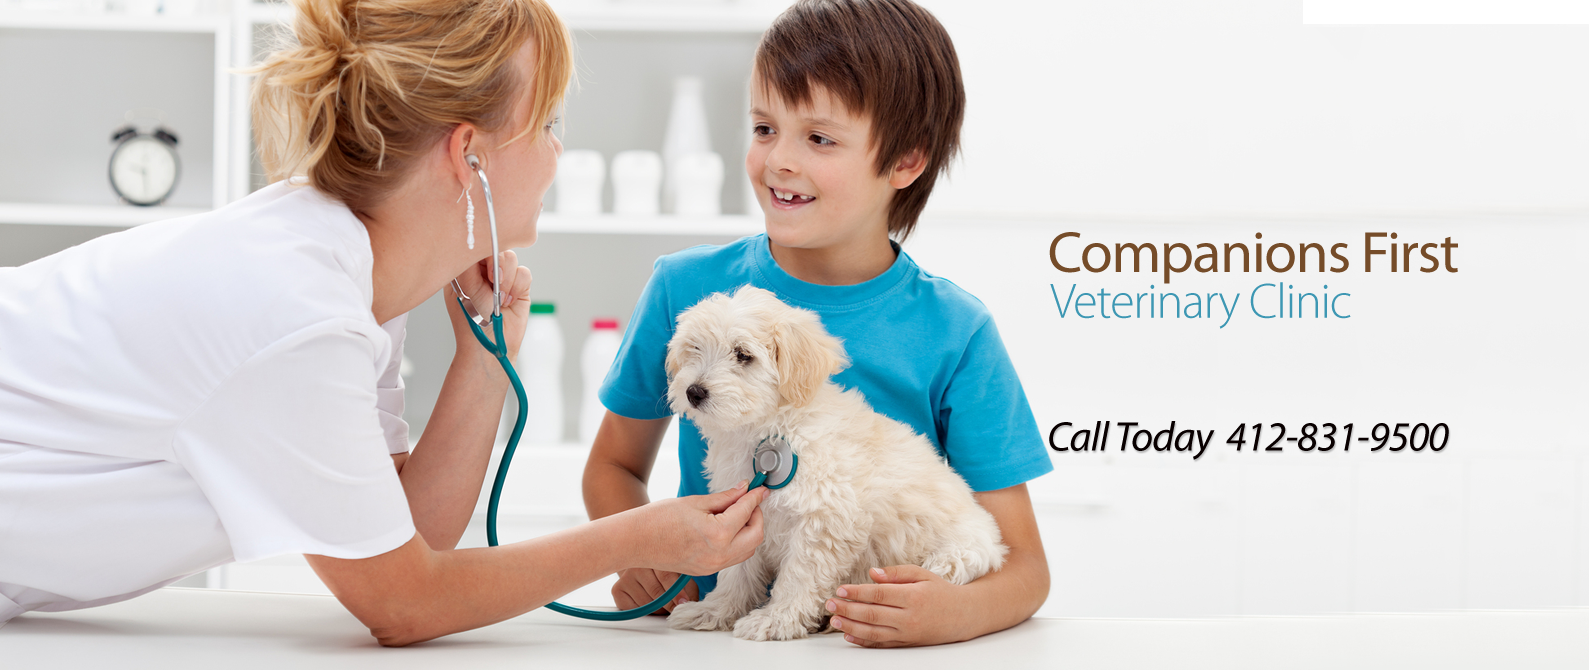 Companions First Vet Clinic